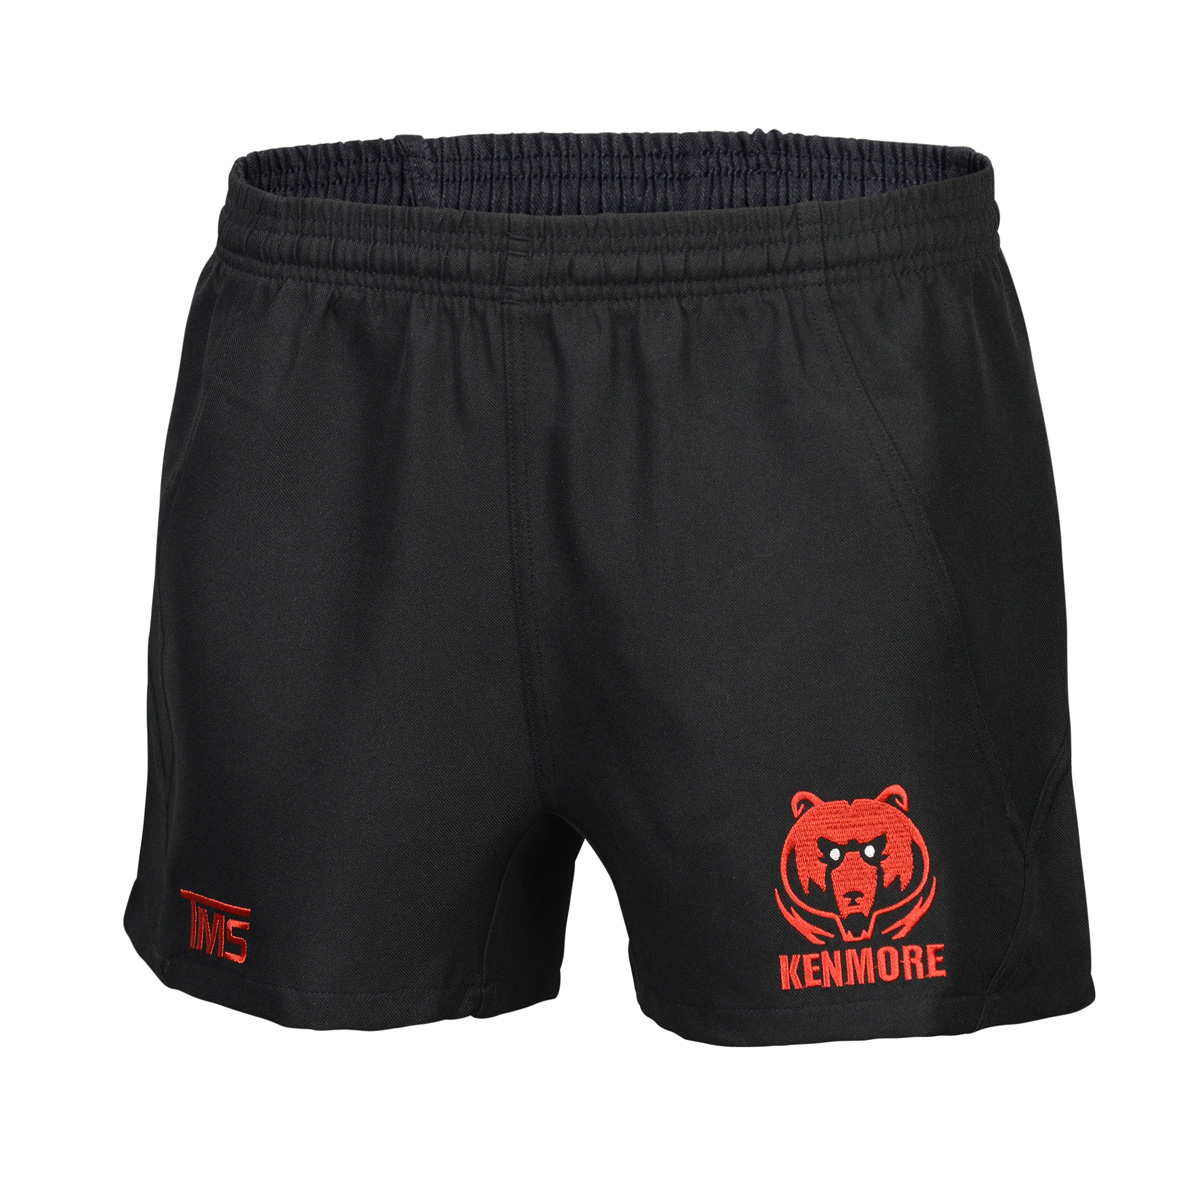 PolyDrill Rugby Shorts